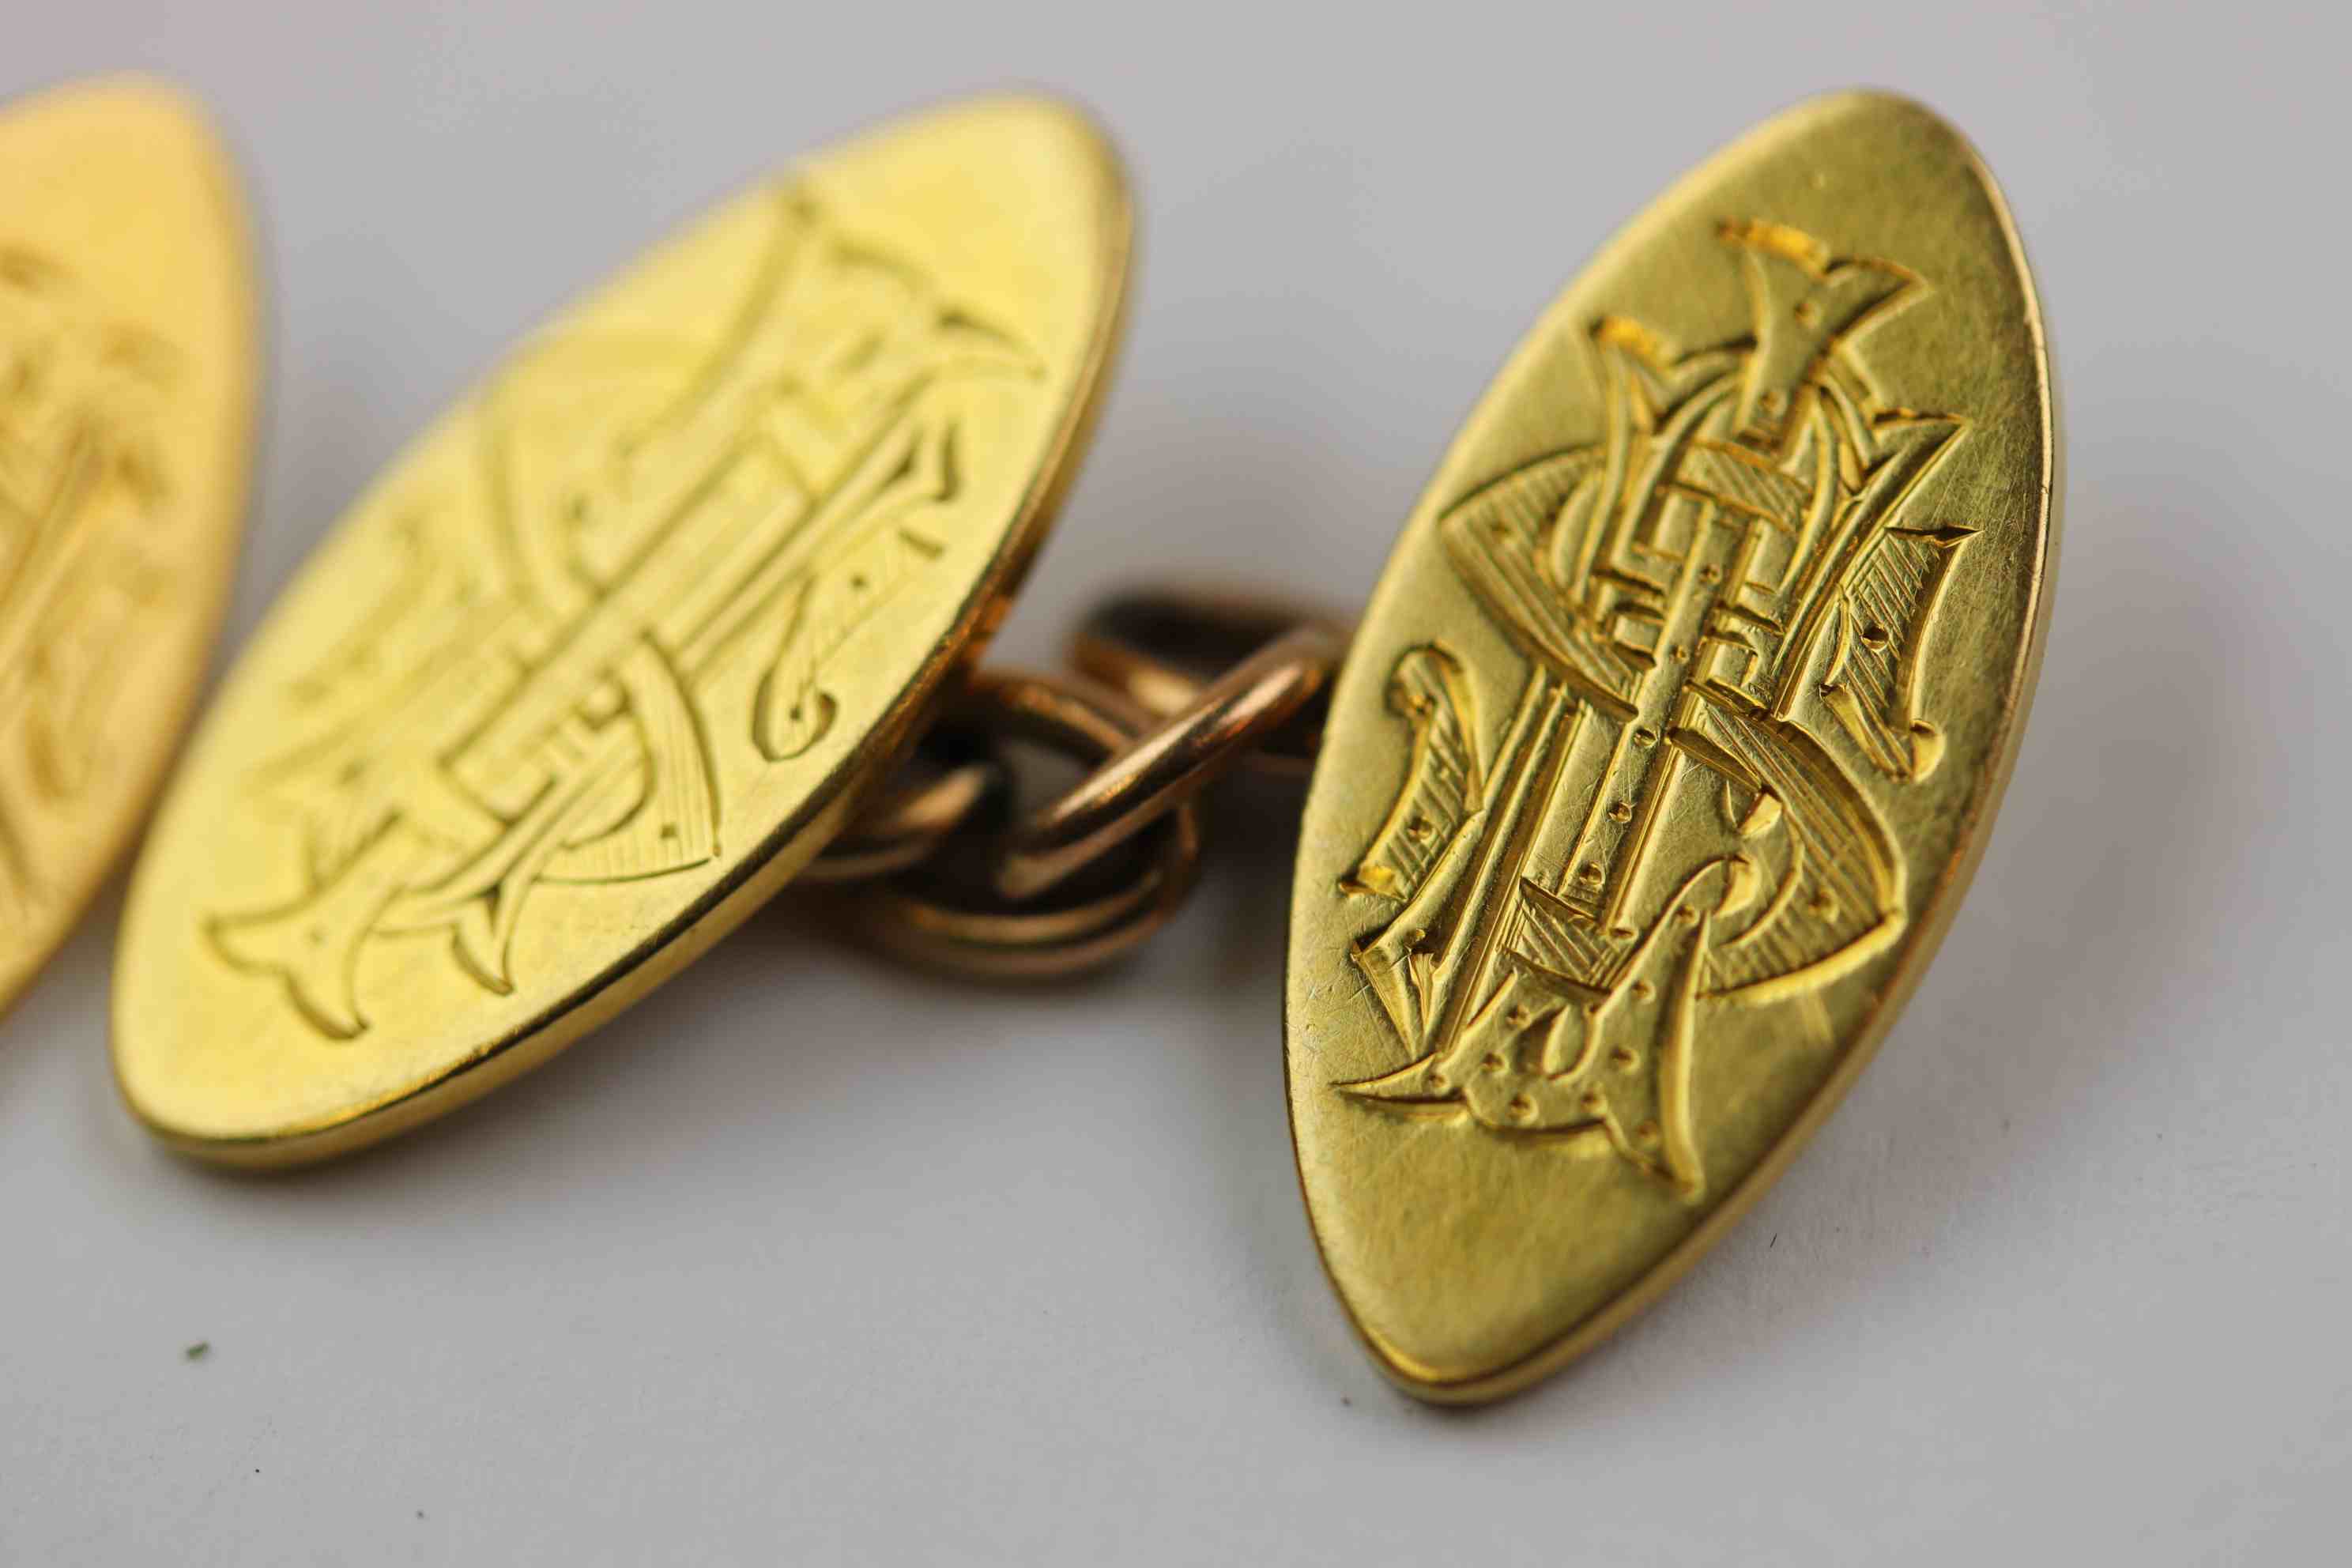 Pair of 18ct yellow gold chain link cufflinks, each navette shaped panel with engraved initials - Image 4 of 6